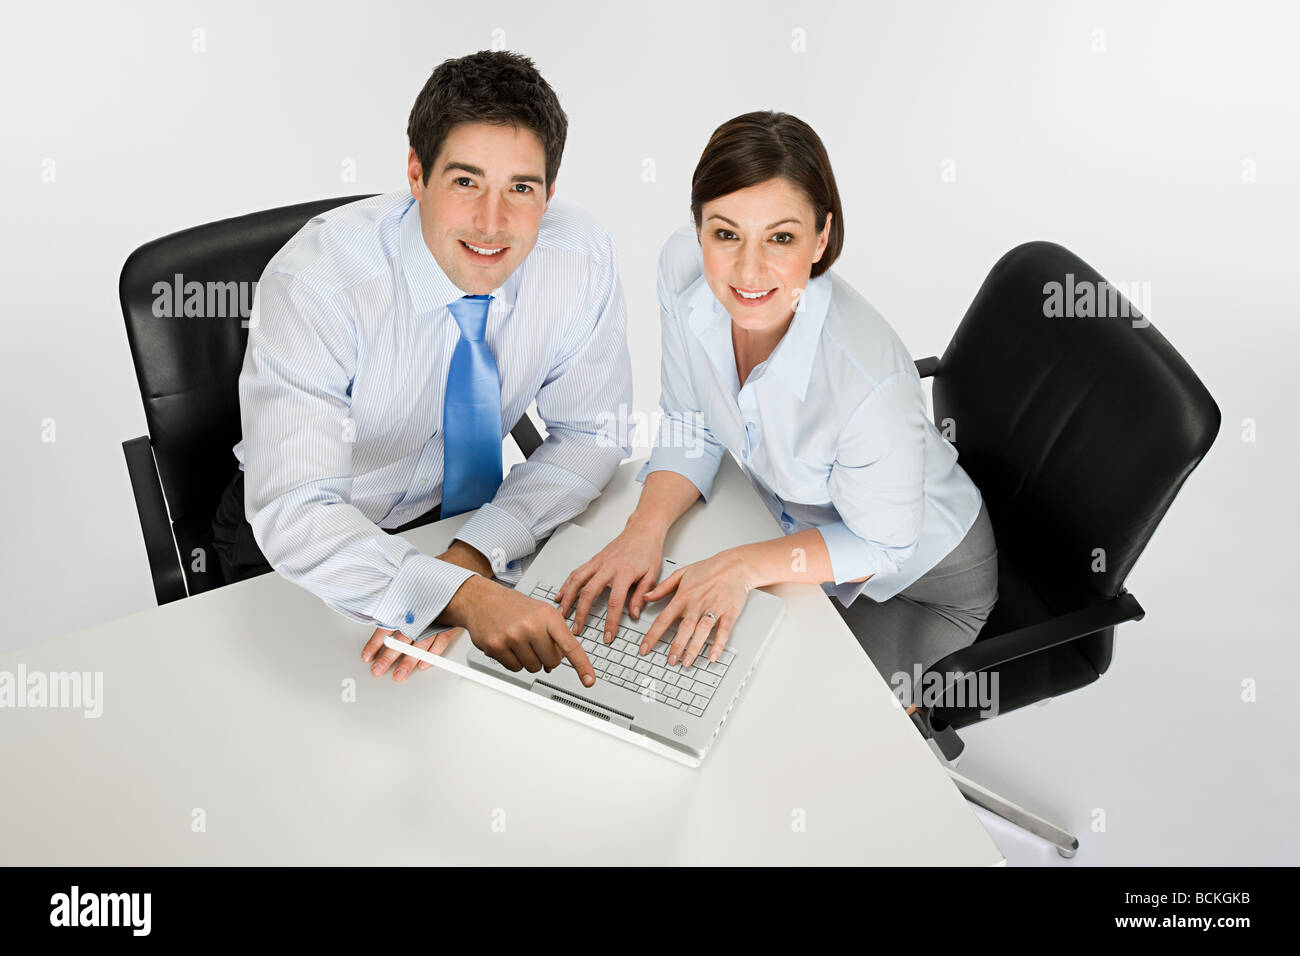 Colleagues with laptop Stock Photo